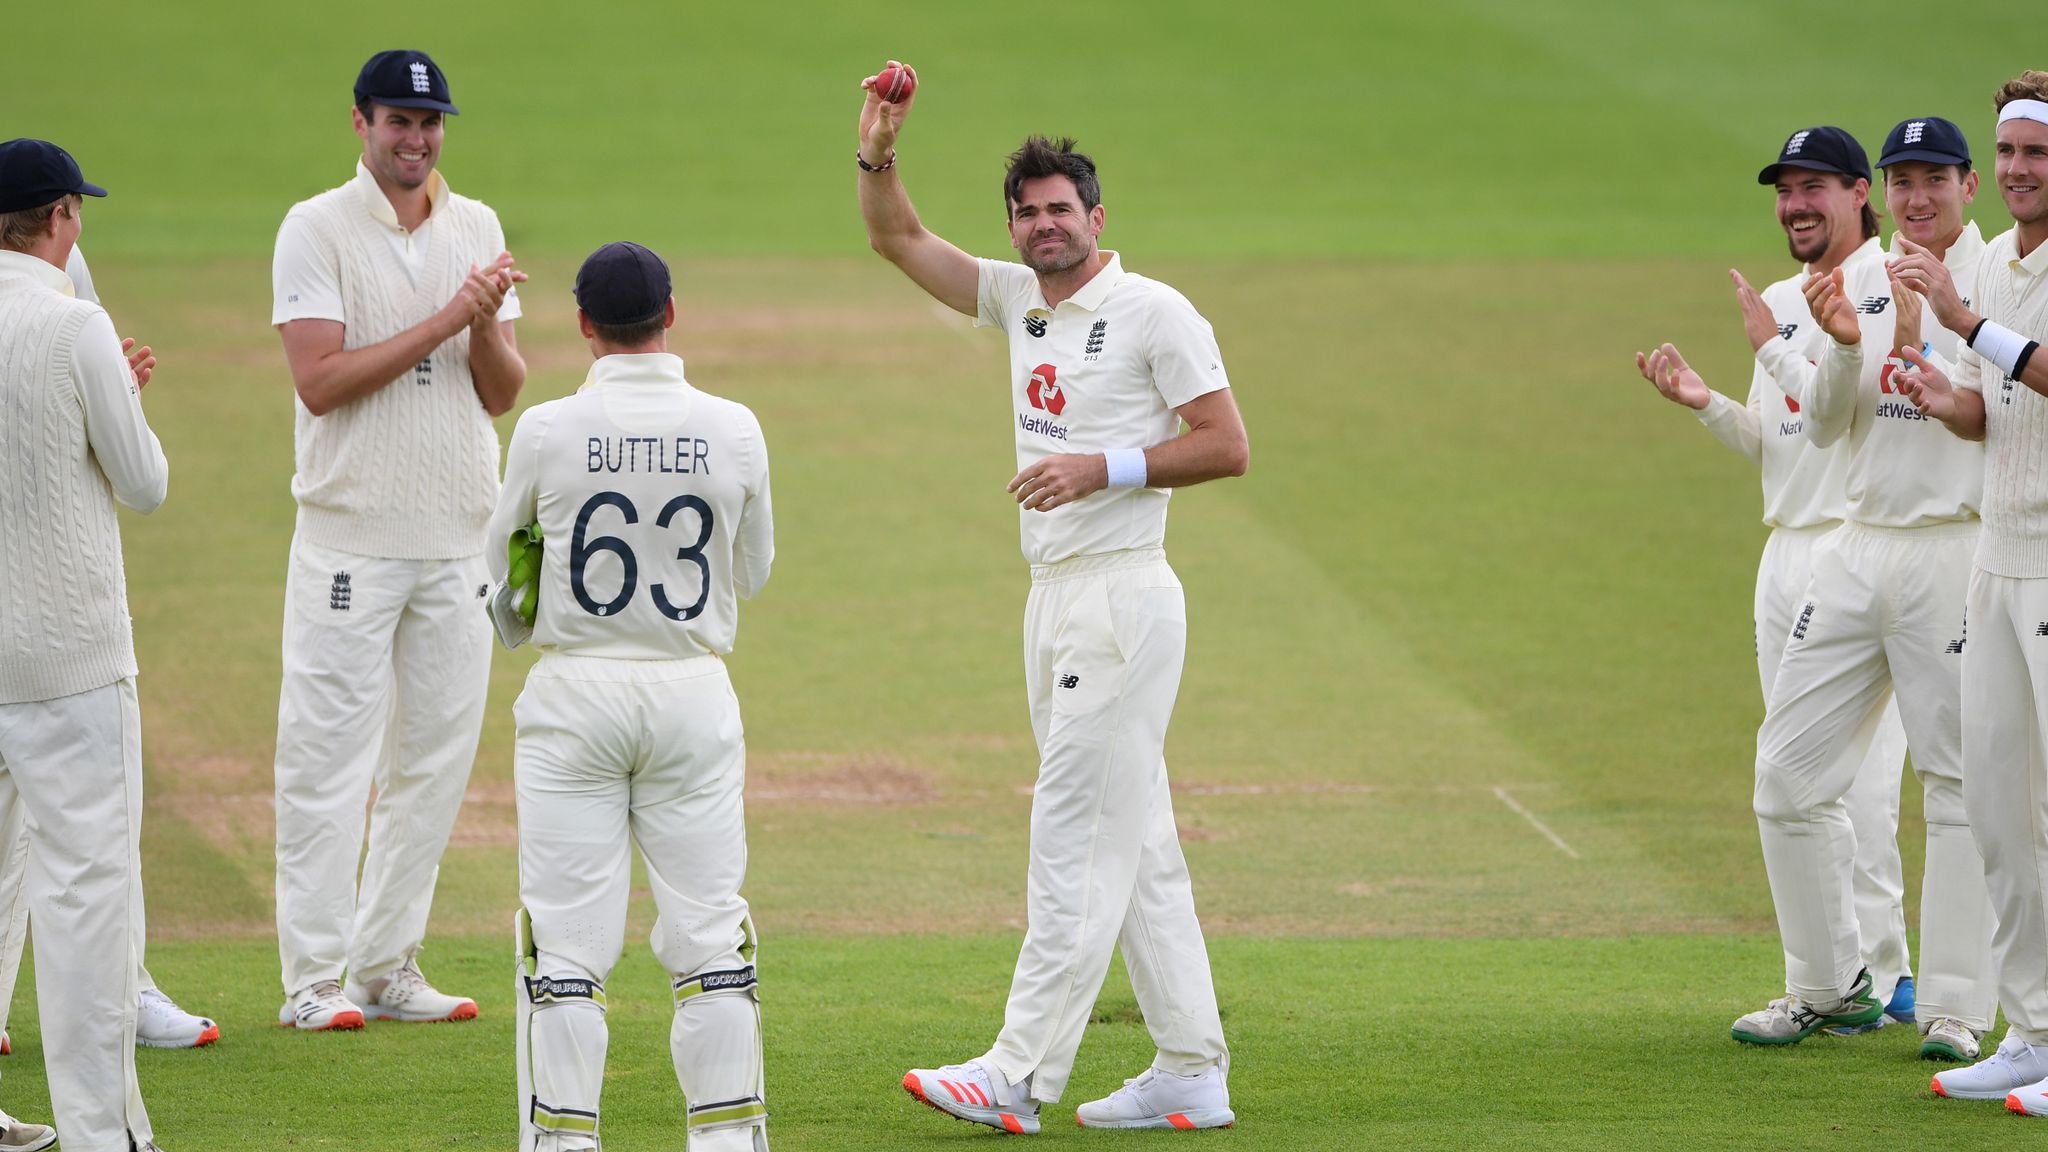 James Anderson hopes for a successful Ashes series without injury